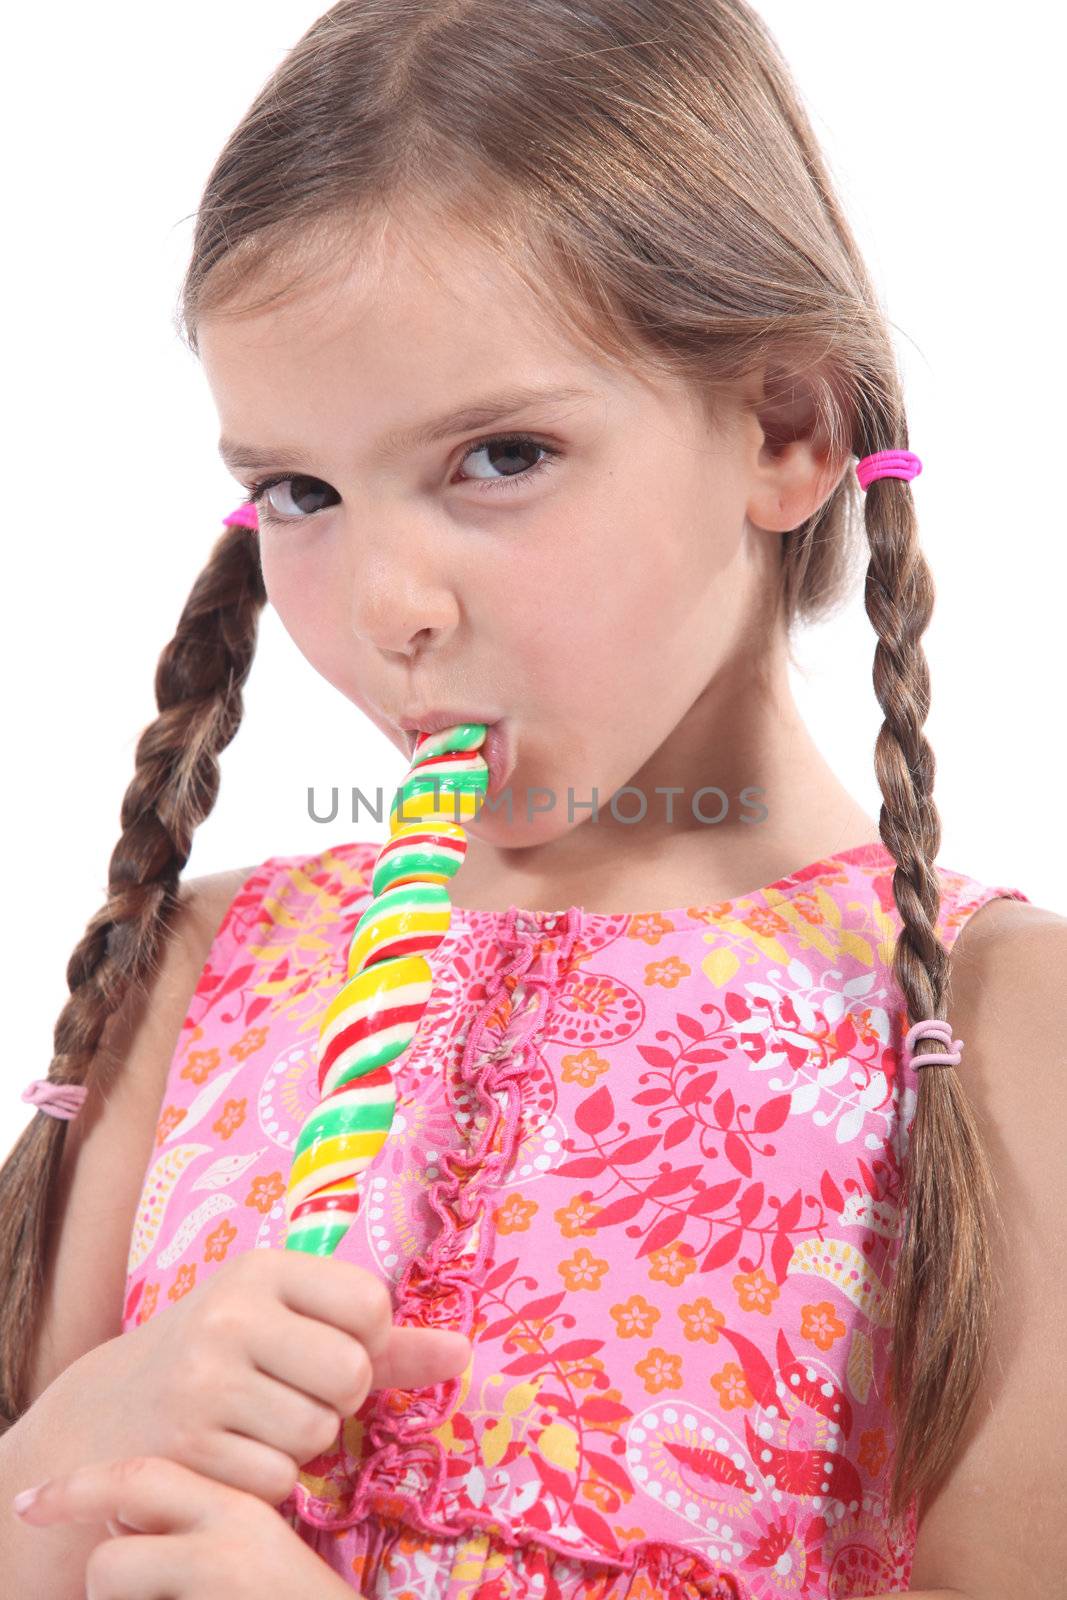 Girl sucking on a candy stick by phovoir